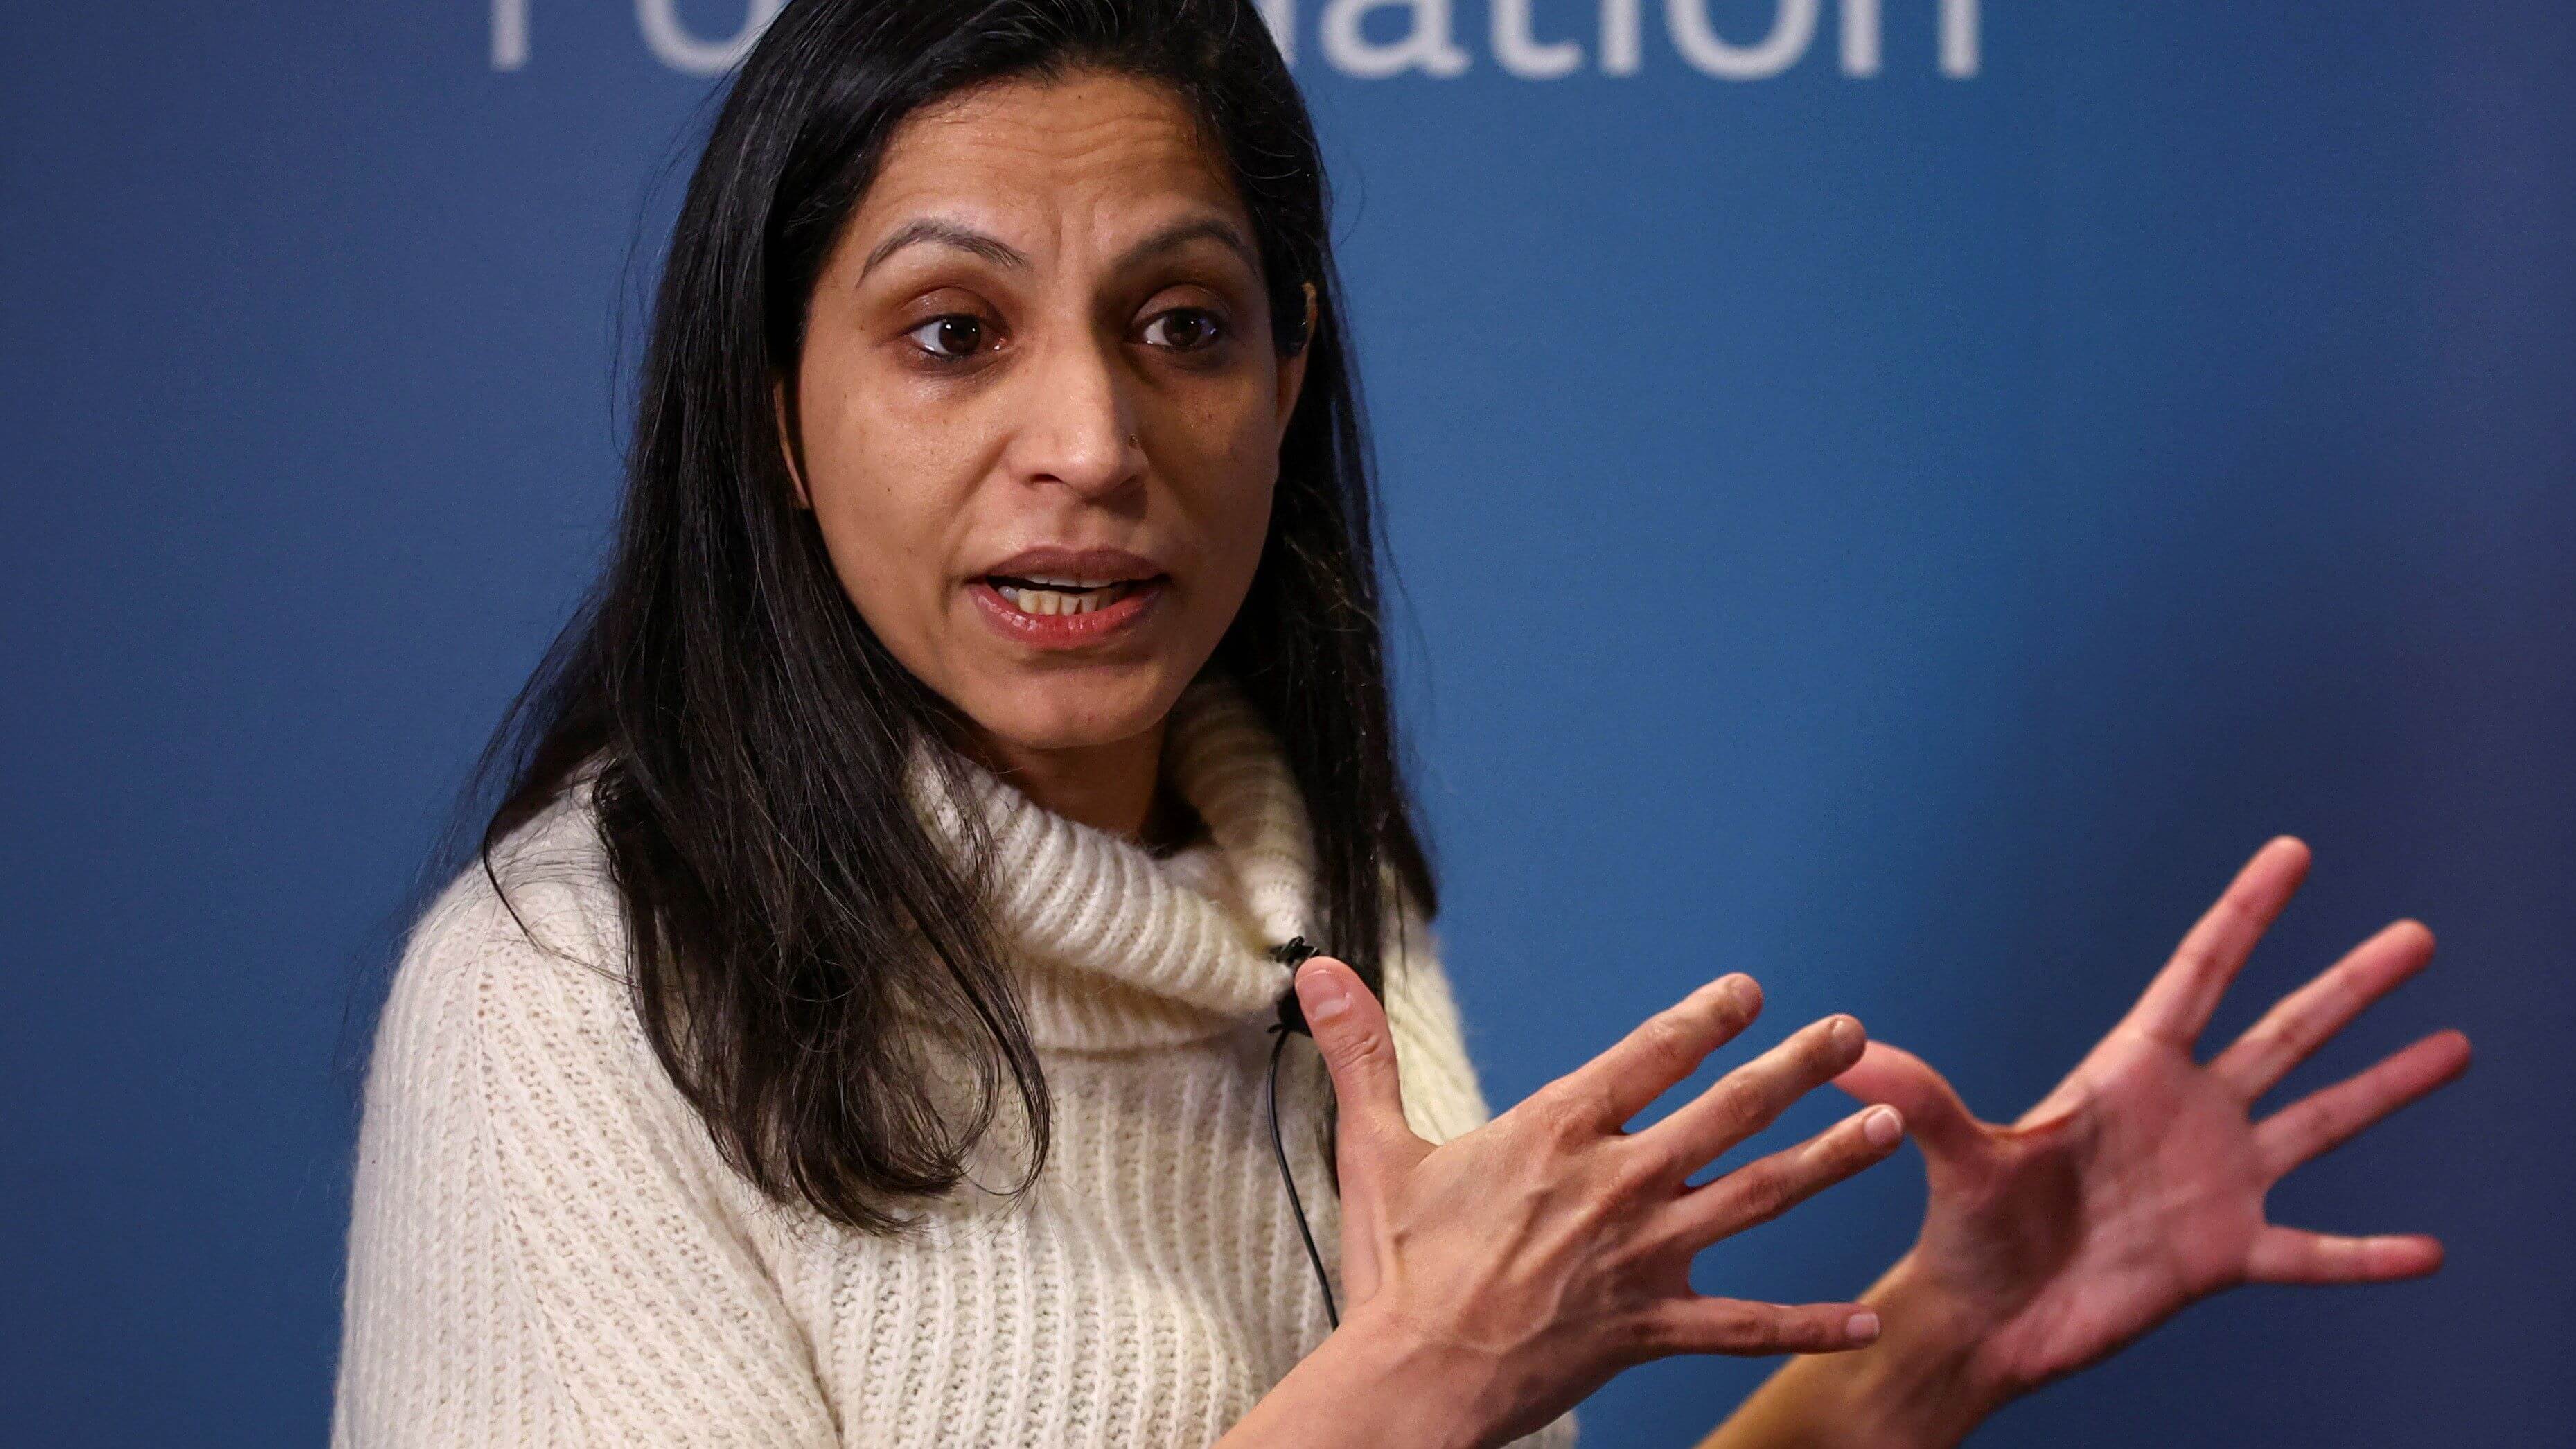 UK Wages Are Responding To Inflation With A Lag, BoE's Dhingra Says